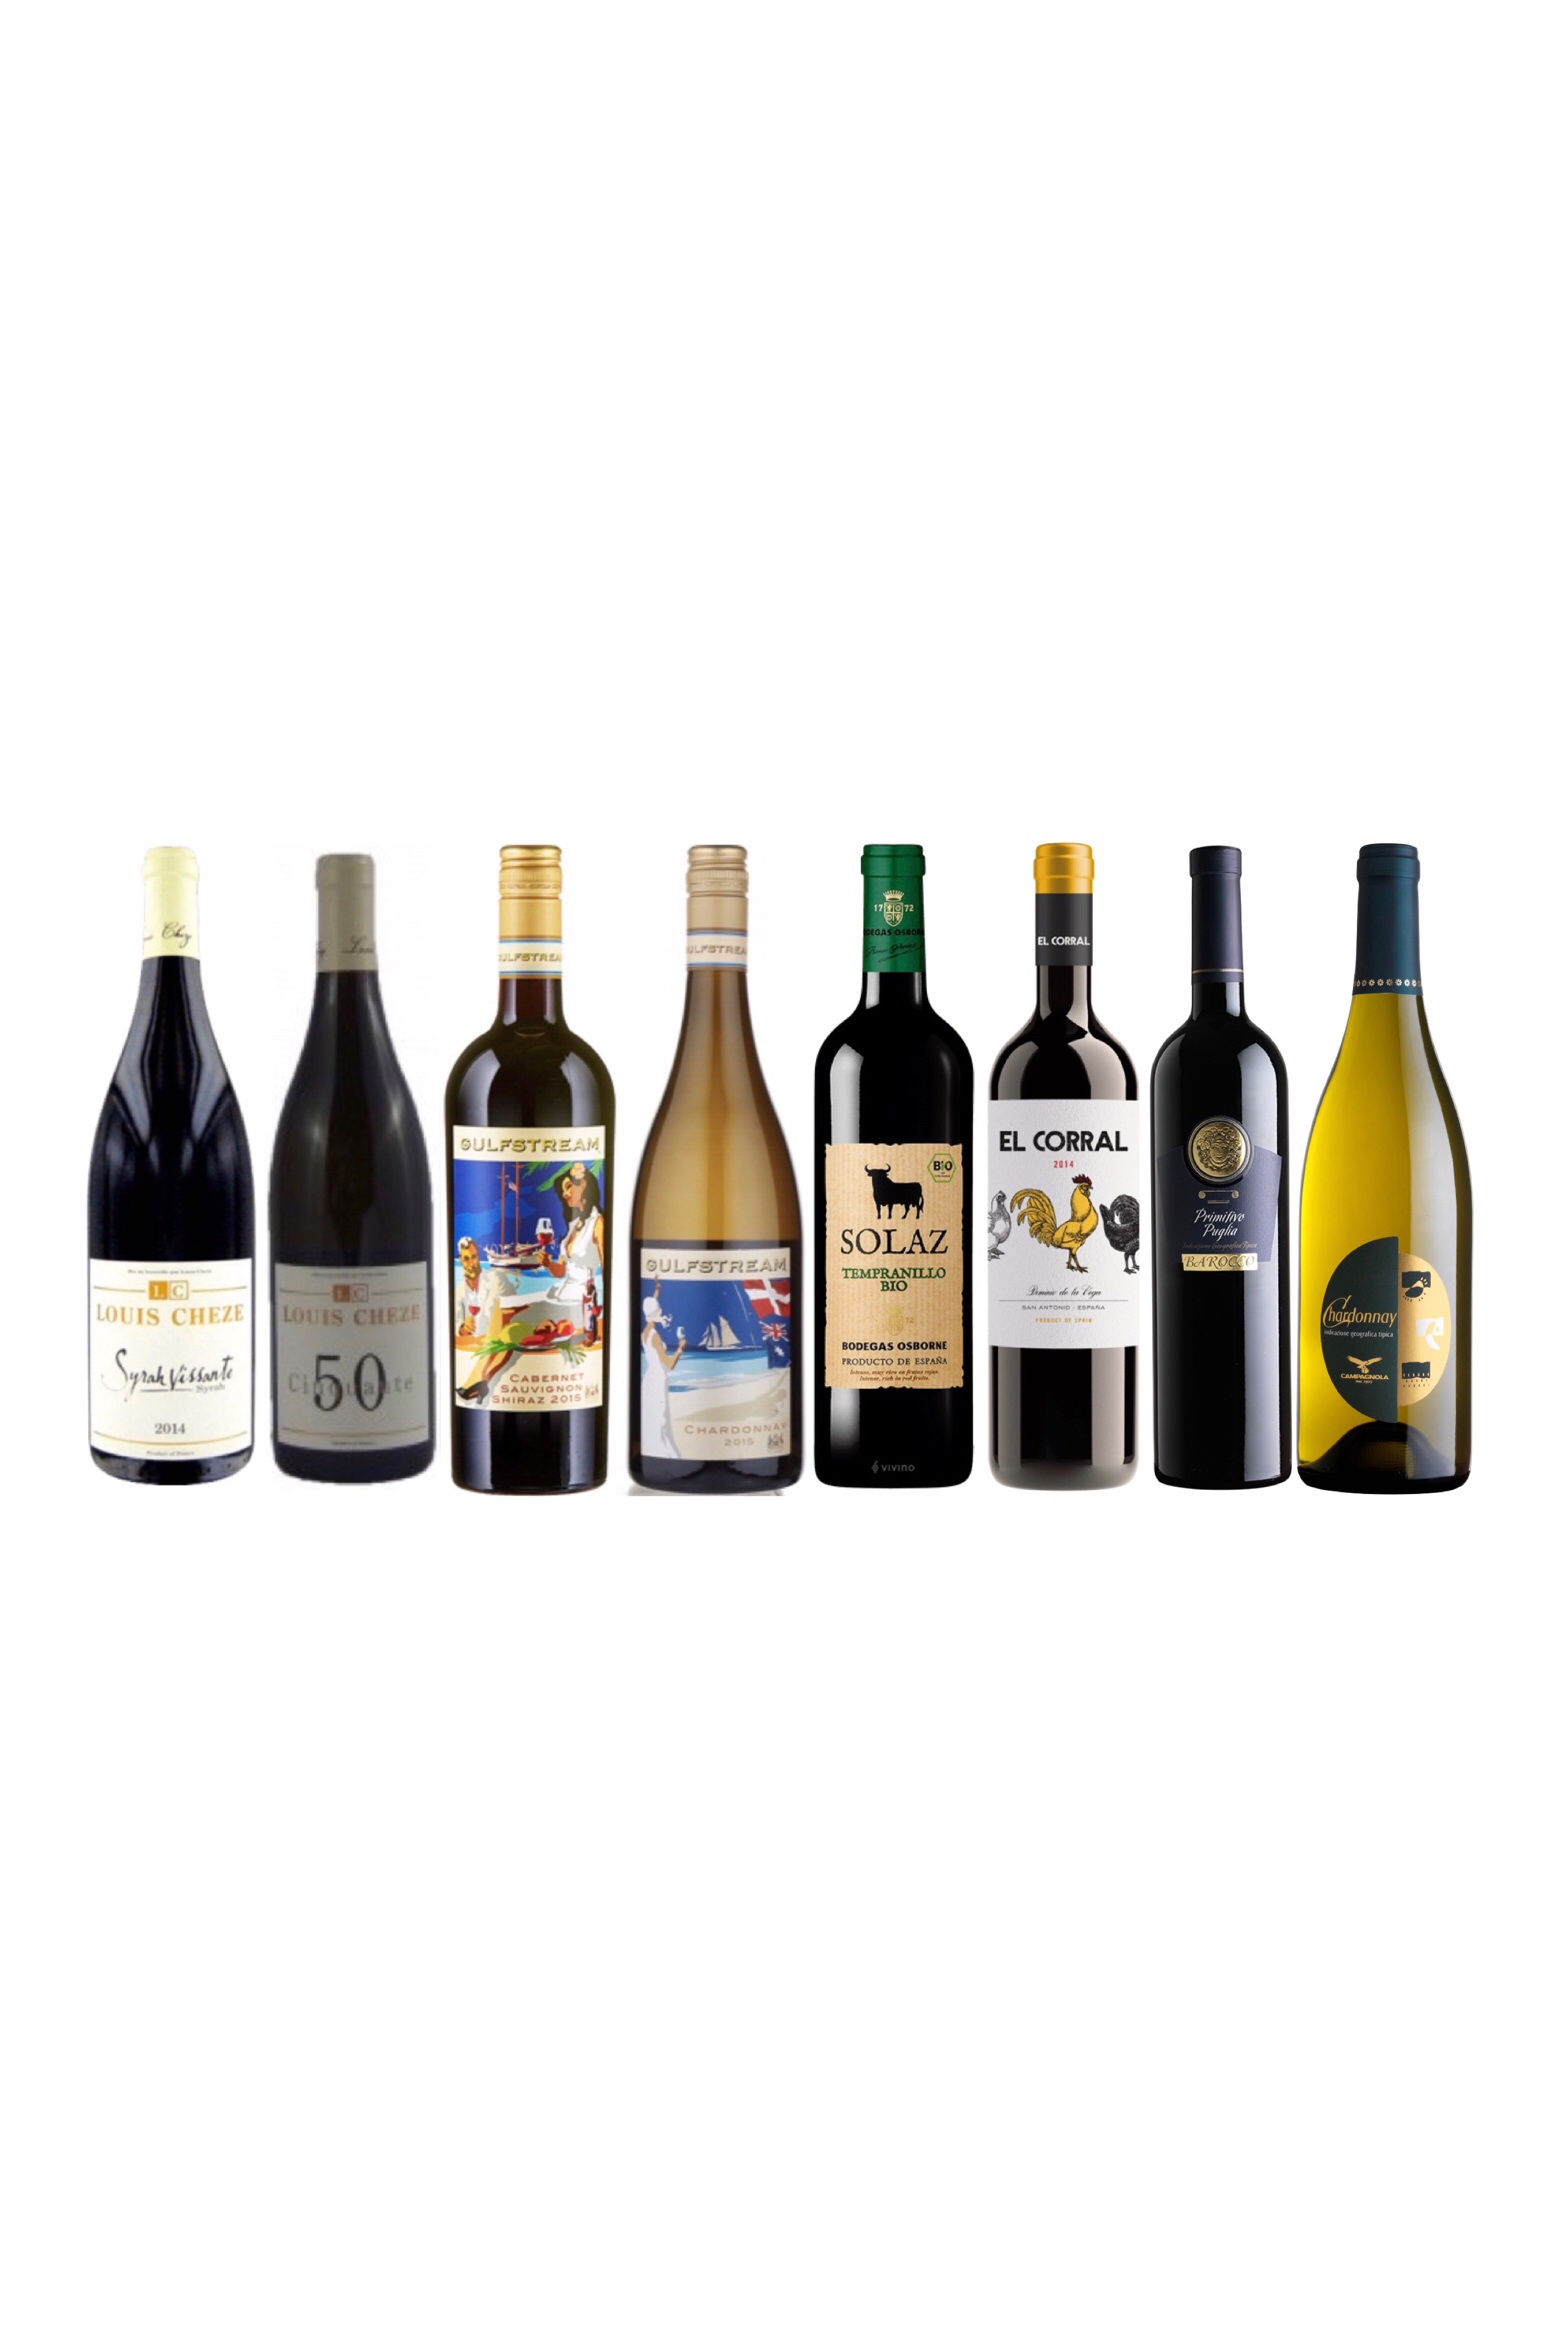 Choose any 2 bottles of wine and get 1 Free with FREE DELIVERY only at $99 !